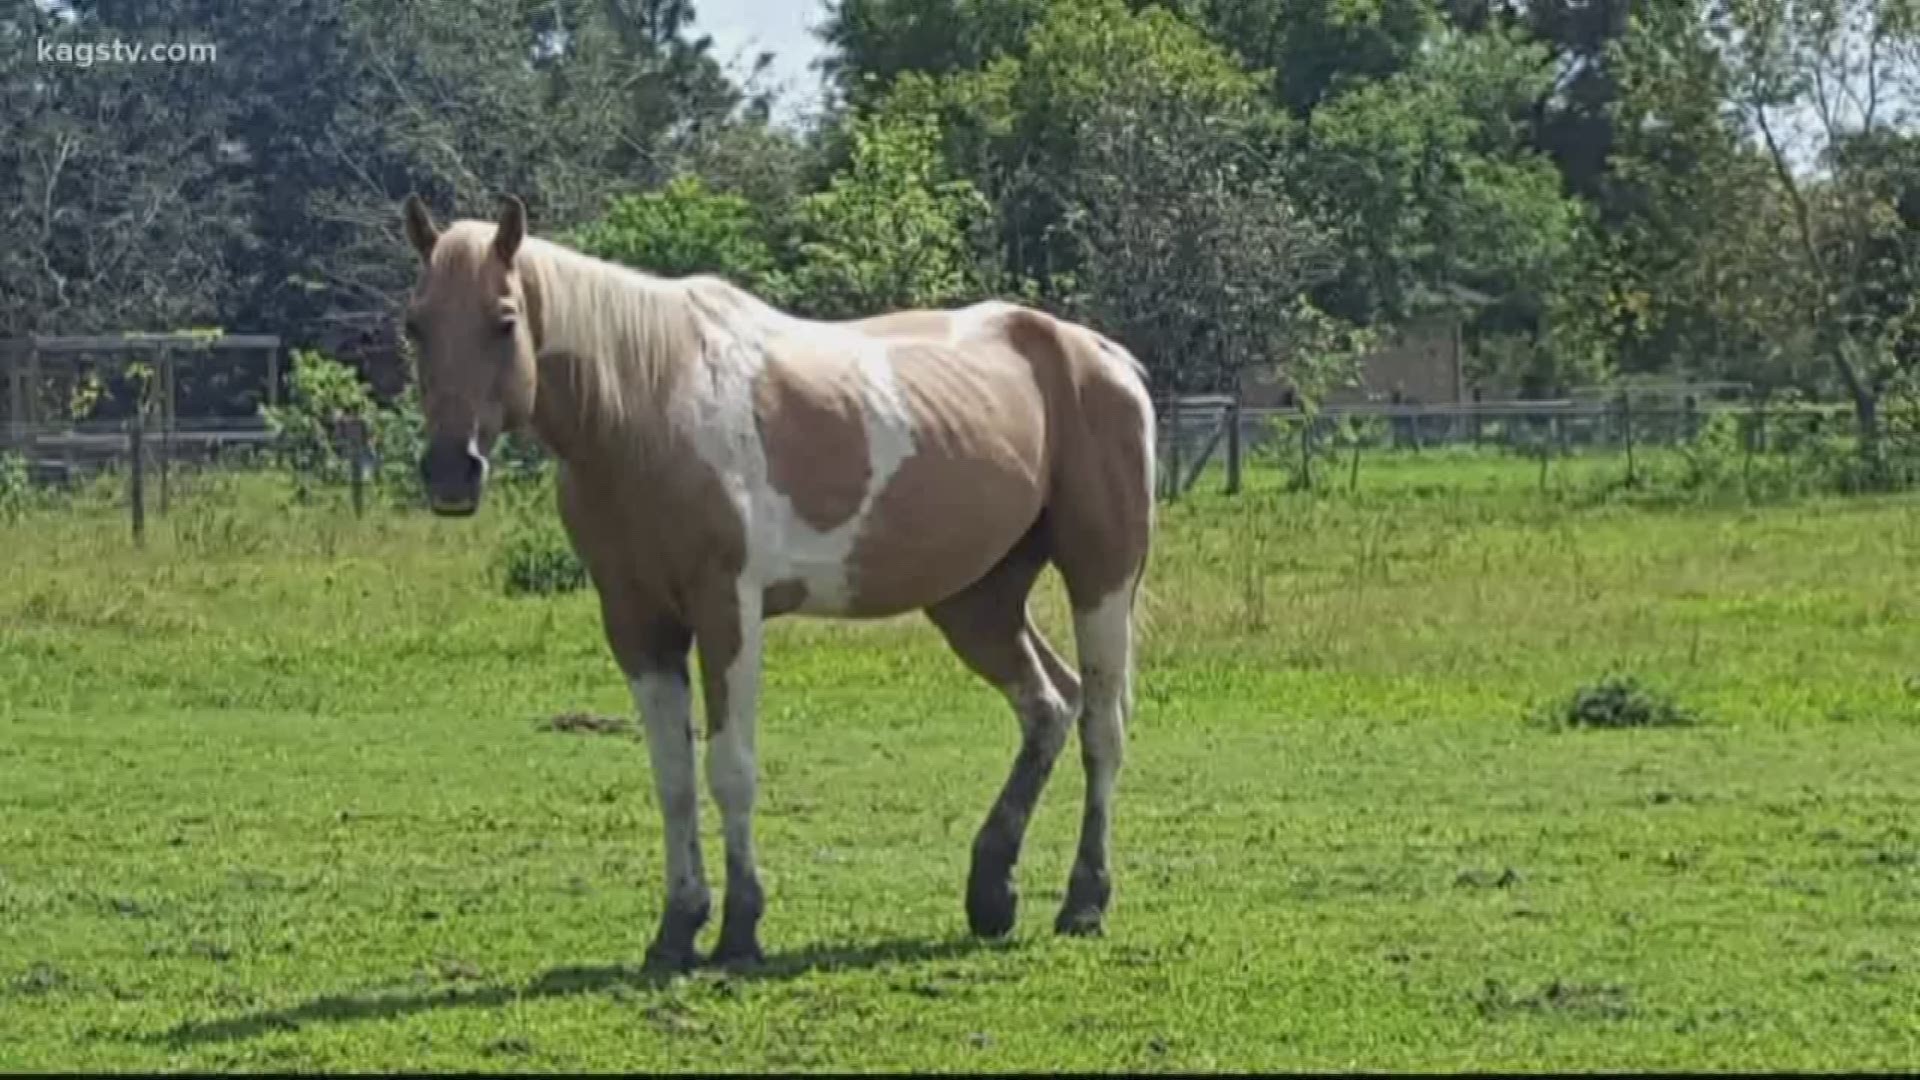 The Bluebonnet Equine Human Society say they've now rescued 1,000 horses in just thirteen years on the job.